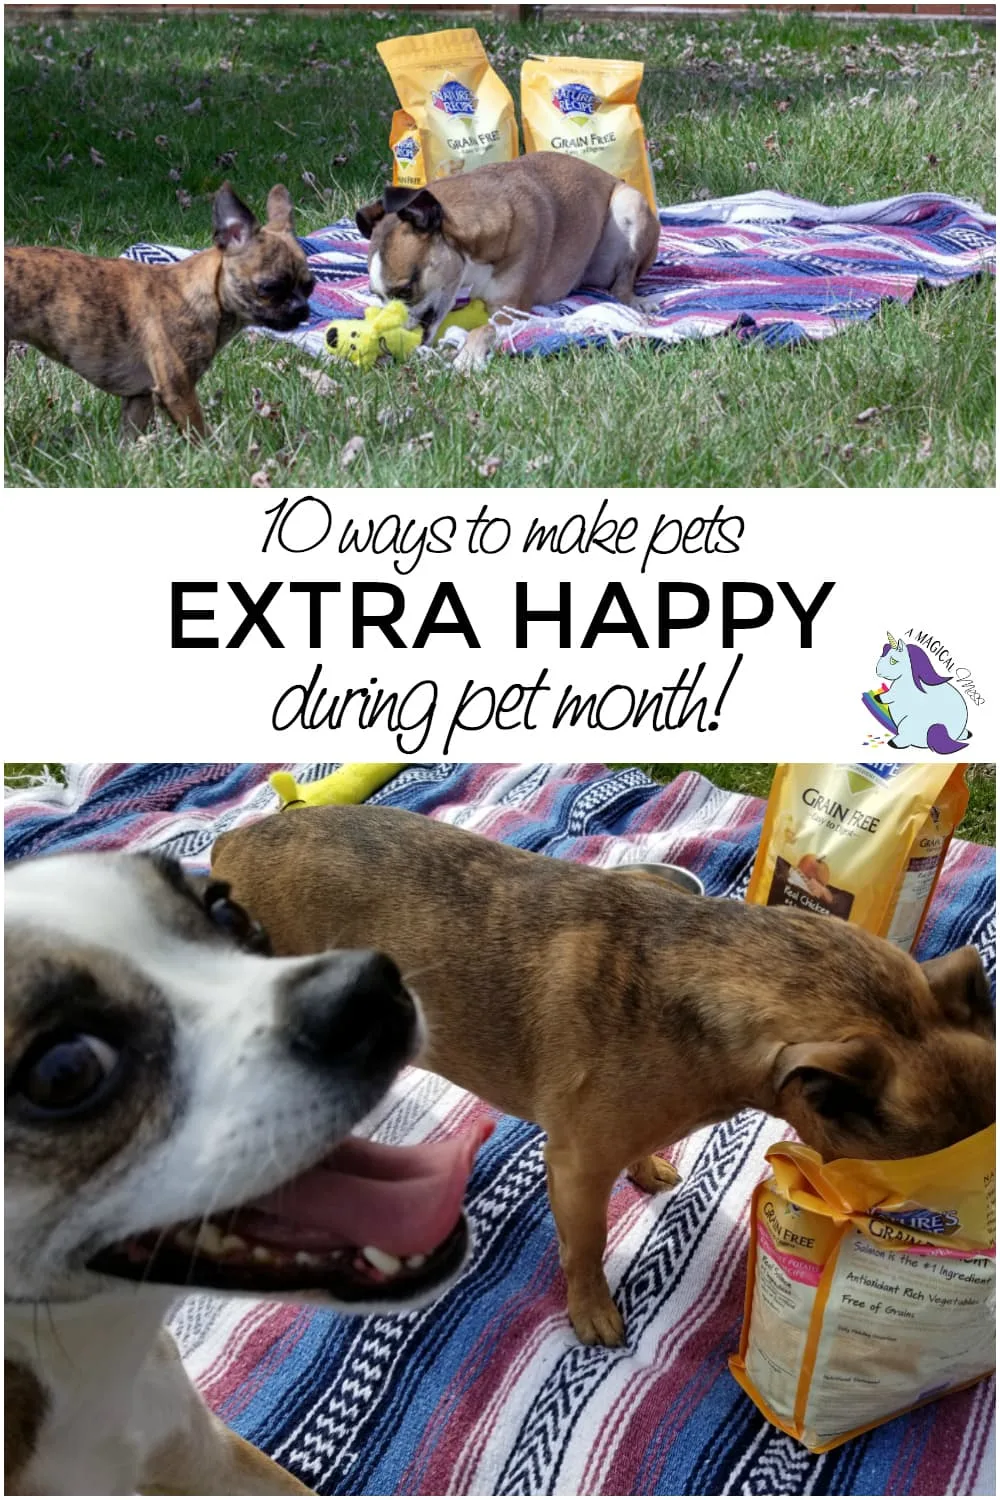 10 Ways to Make Dogs Happy During Pet Month